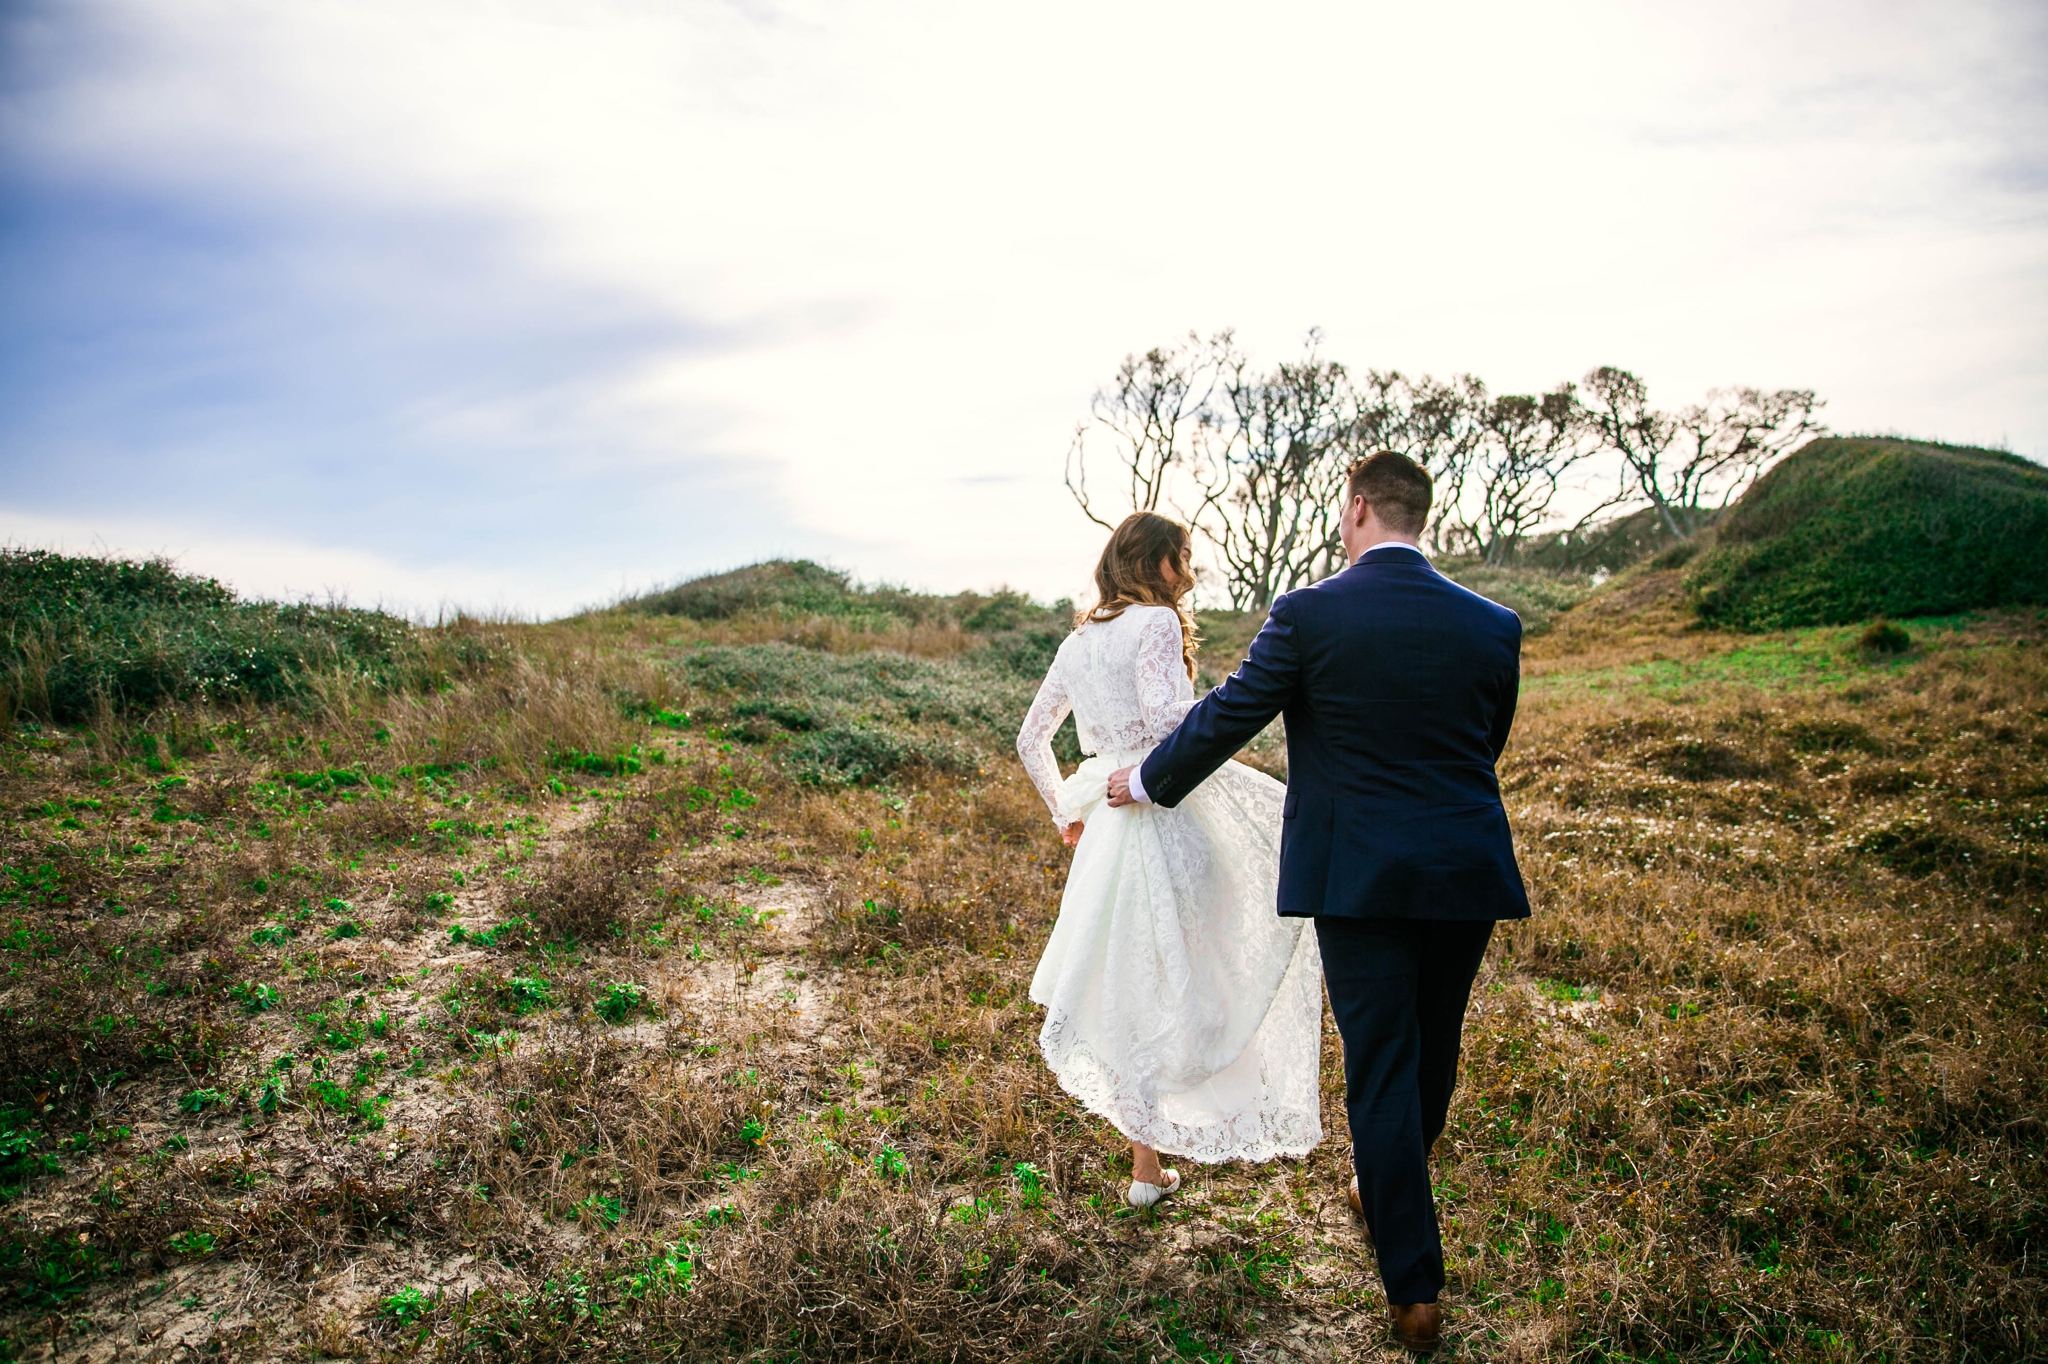 Groom holding brides dress while walking in Lush Green Hills - Beach Elopement Photography - wedding dress by asos with purple and pink flowers and navy suit - oahu hawaii wedding photographer